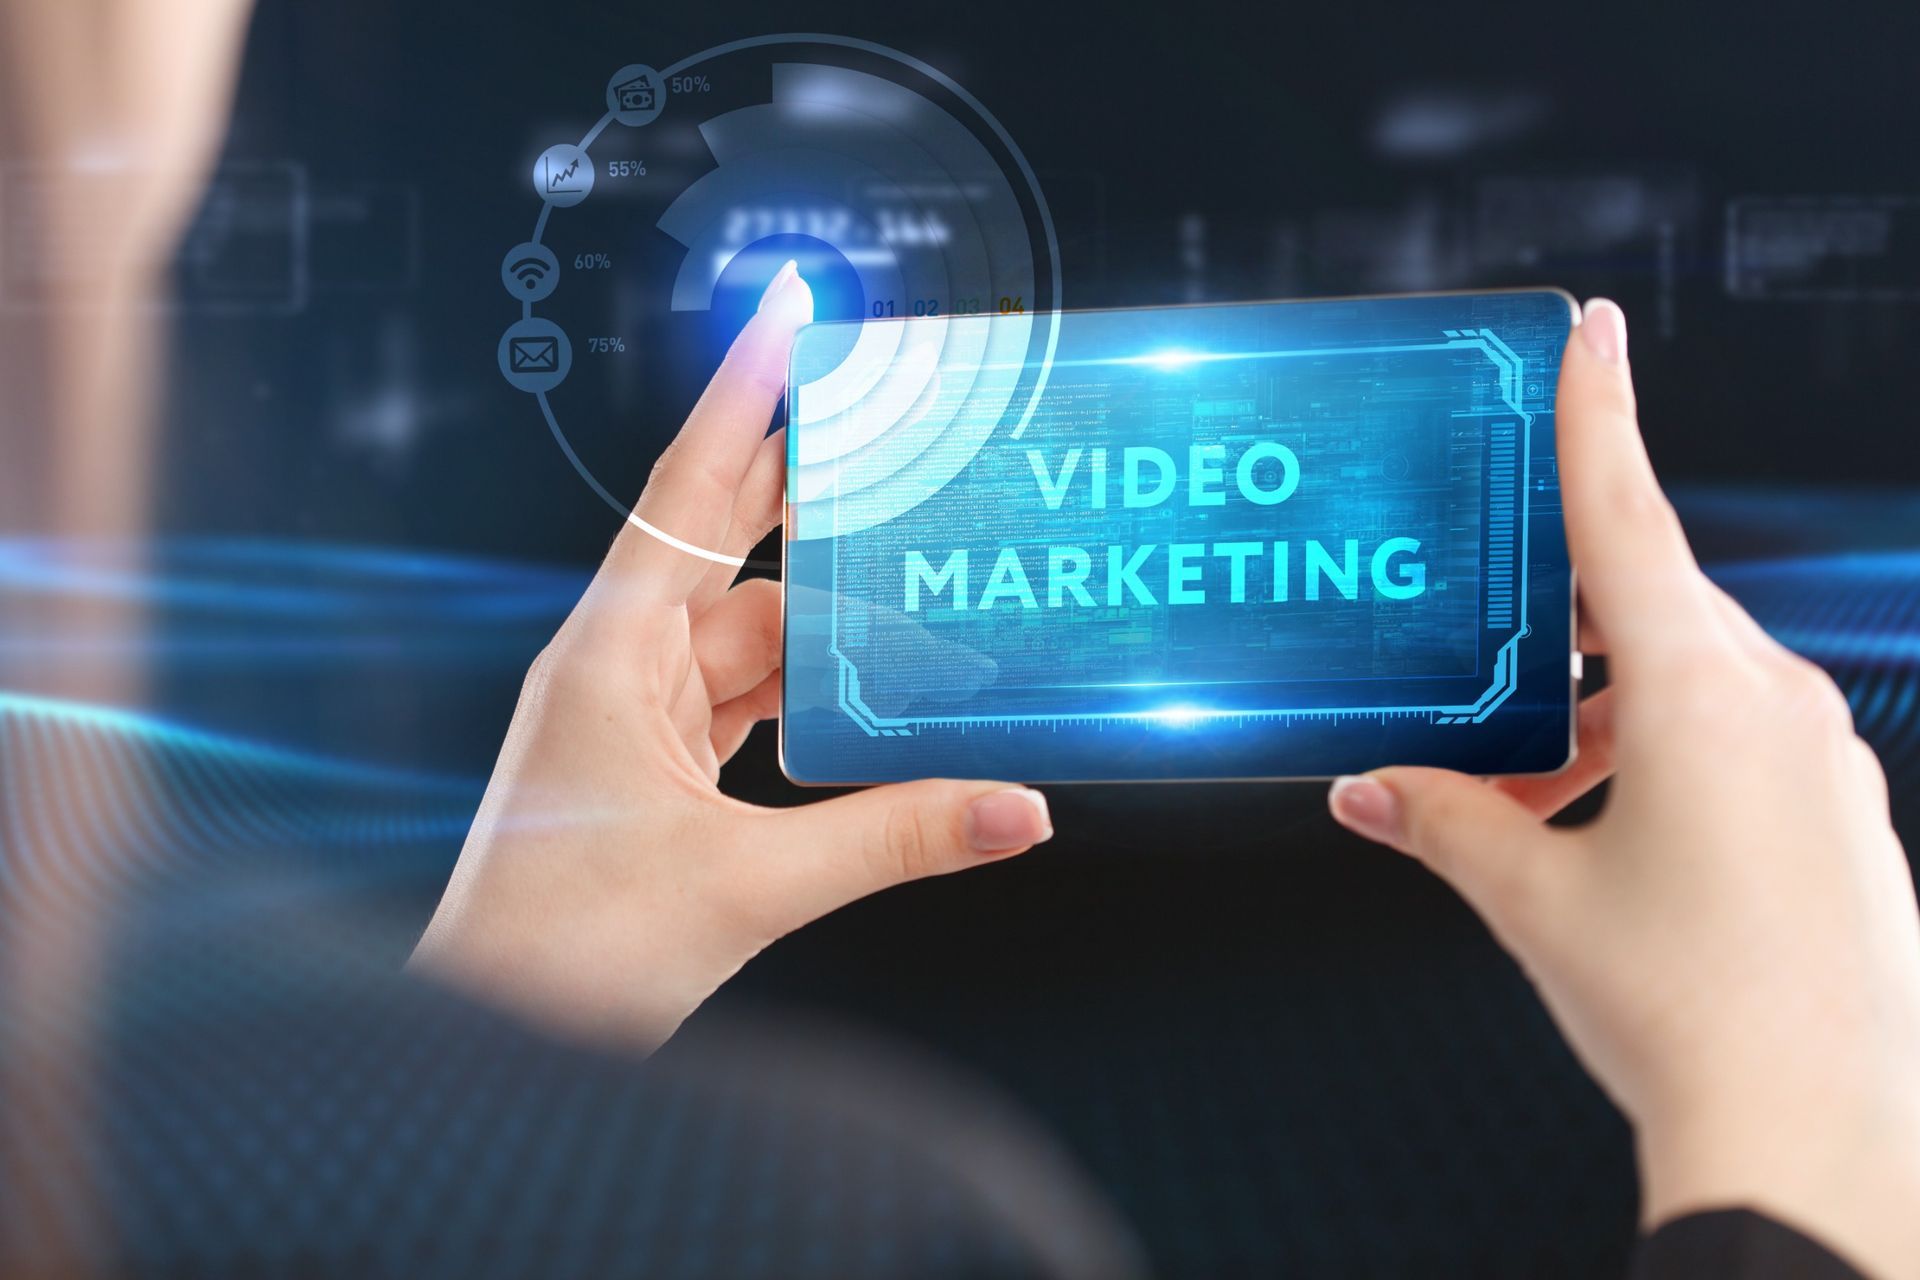 What is Video Marketing? Benefits, Challenges, and Best Practices